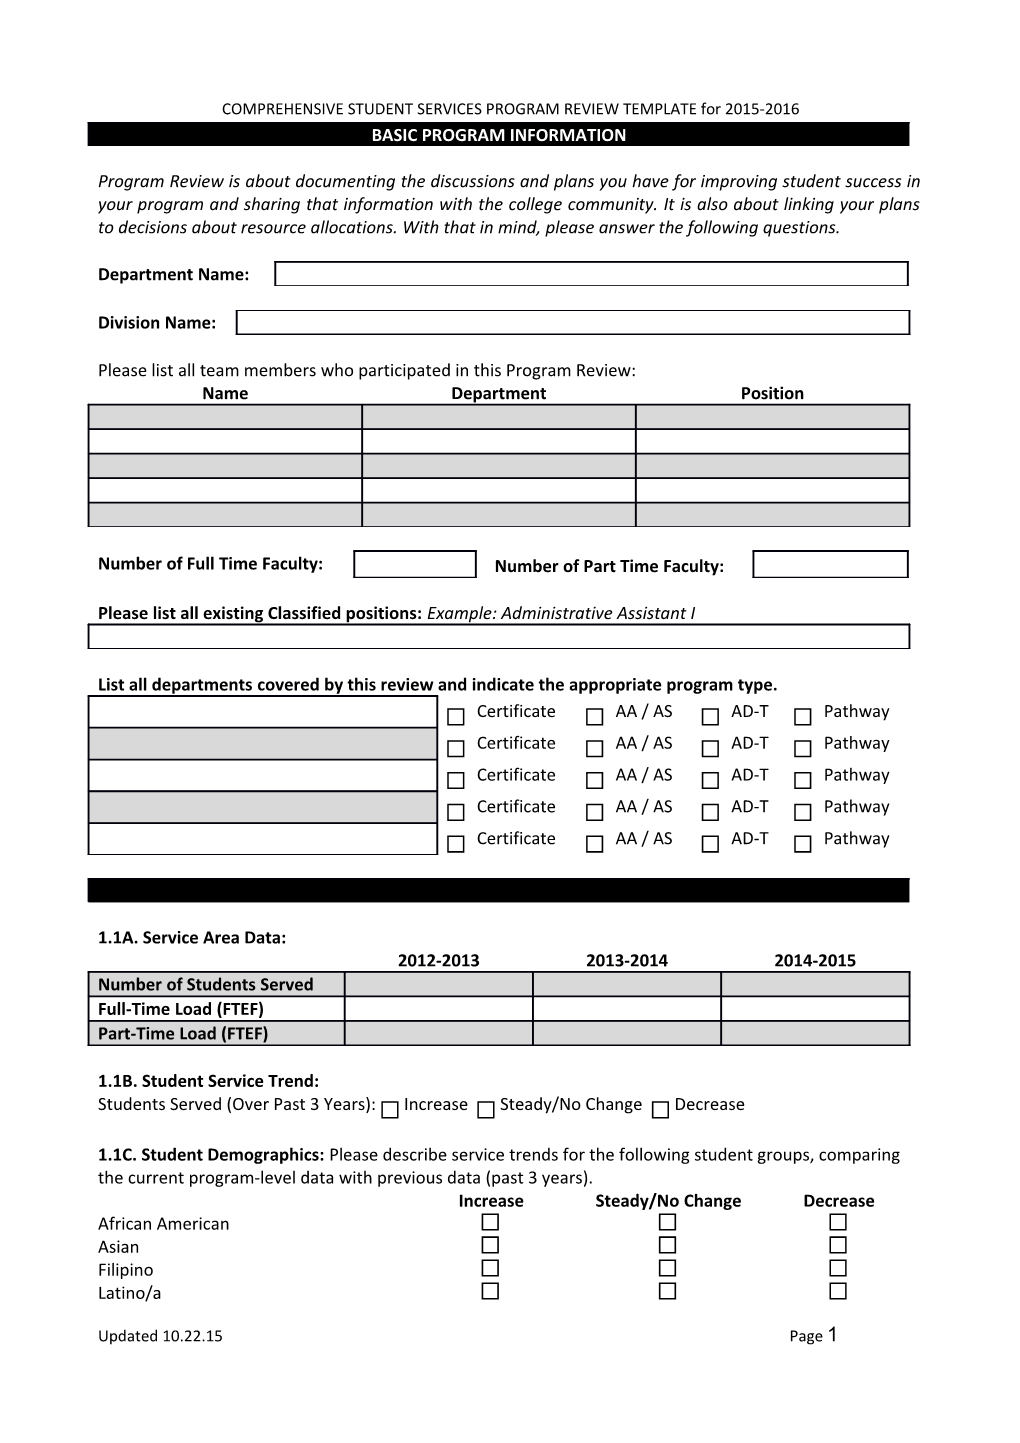 COMPREHENSIVE STUDENT SERVICES PROGRAM REVIEW TEMPLATE for 2015-2016